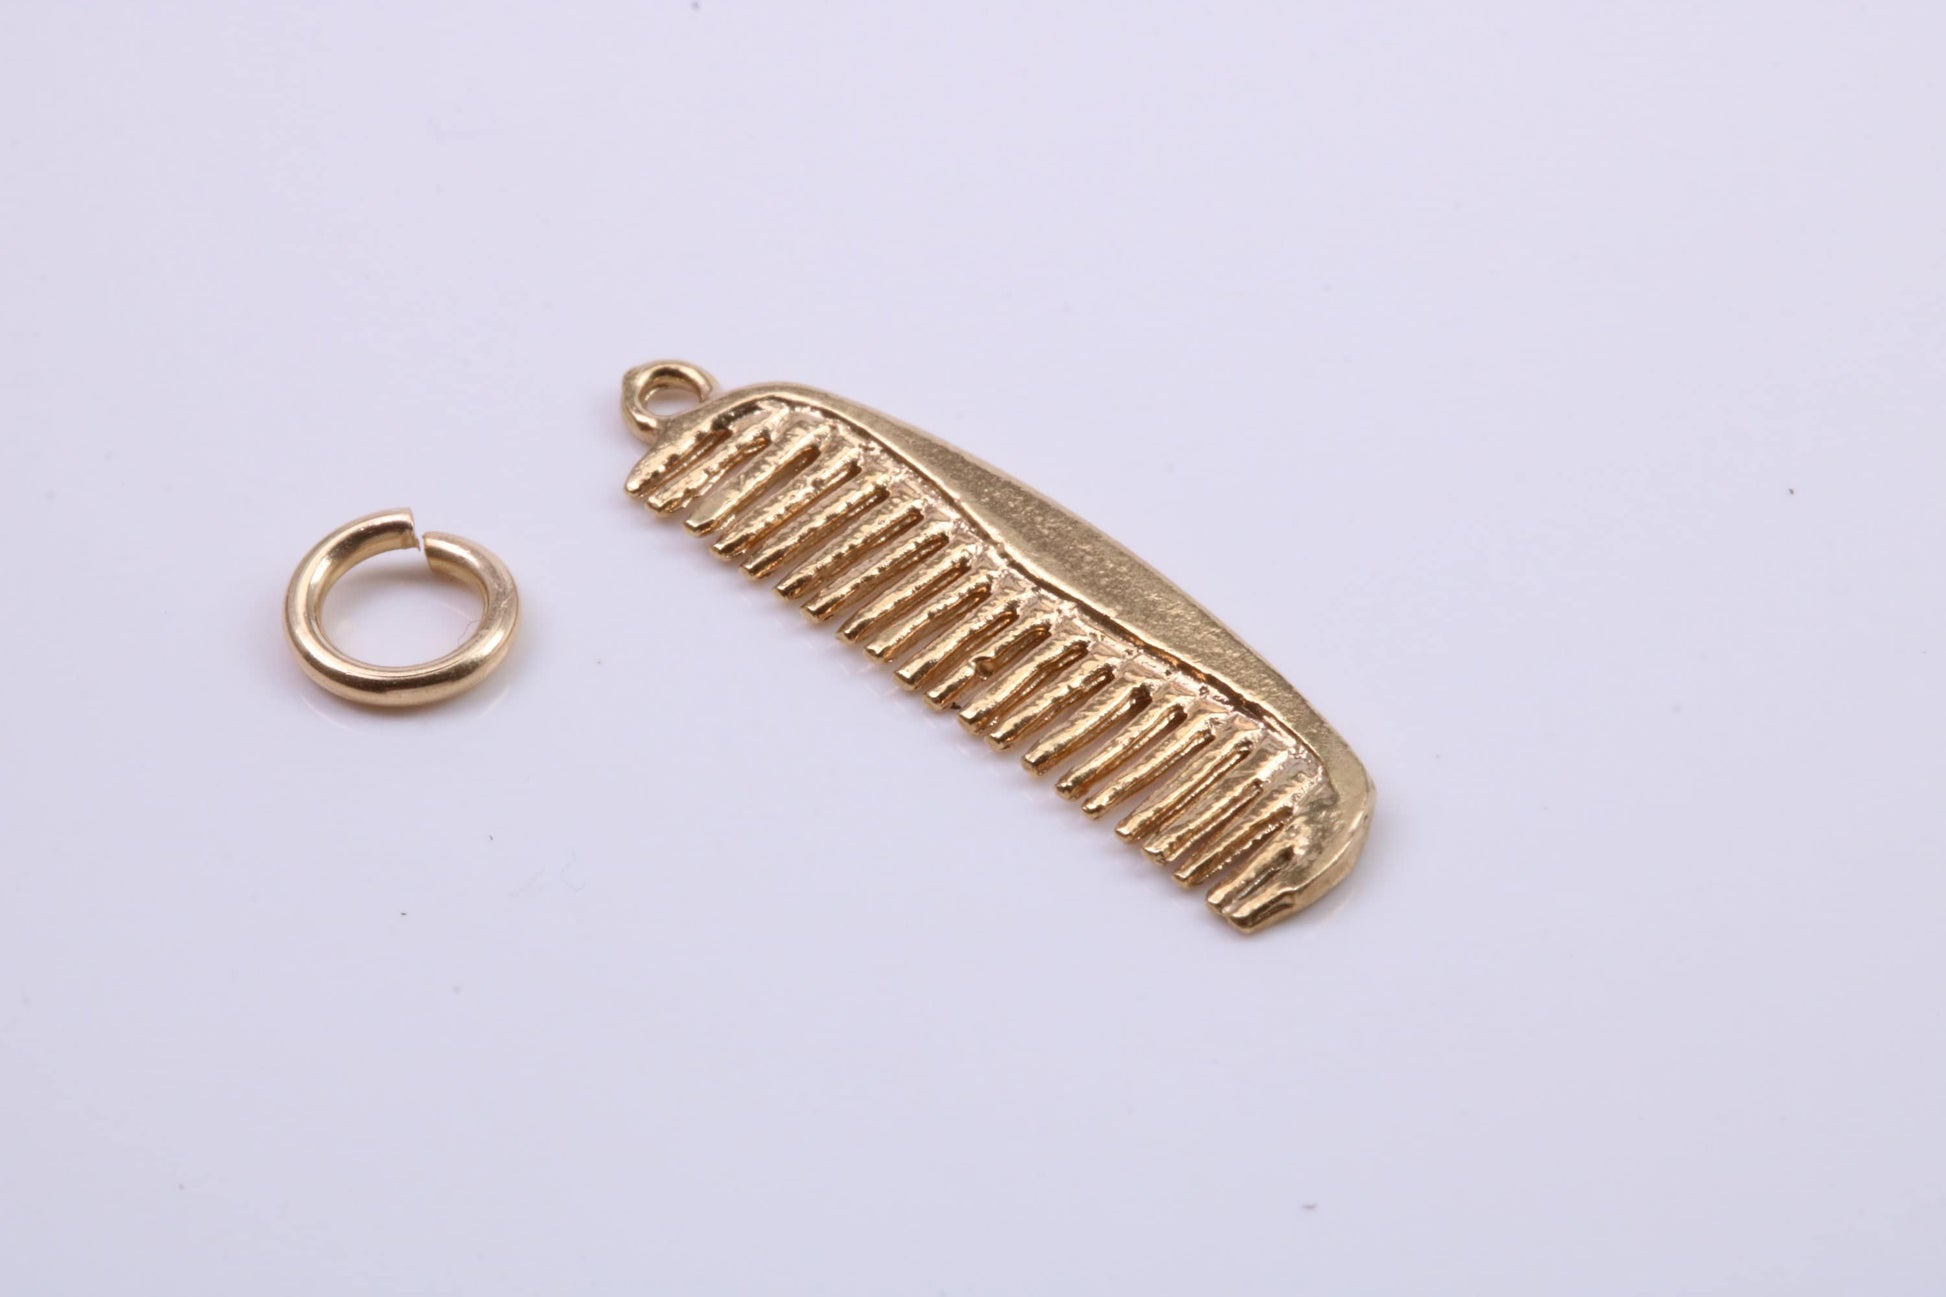 Hair Comb Charm, Traditional Charm, Made from Solid 9ct Yellow Gold, British Hallmarked, Complete with Attachment Link